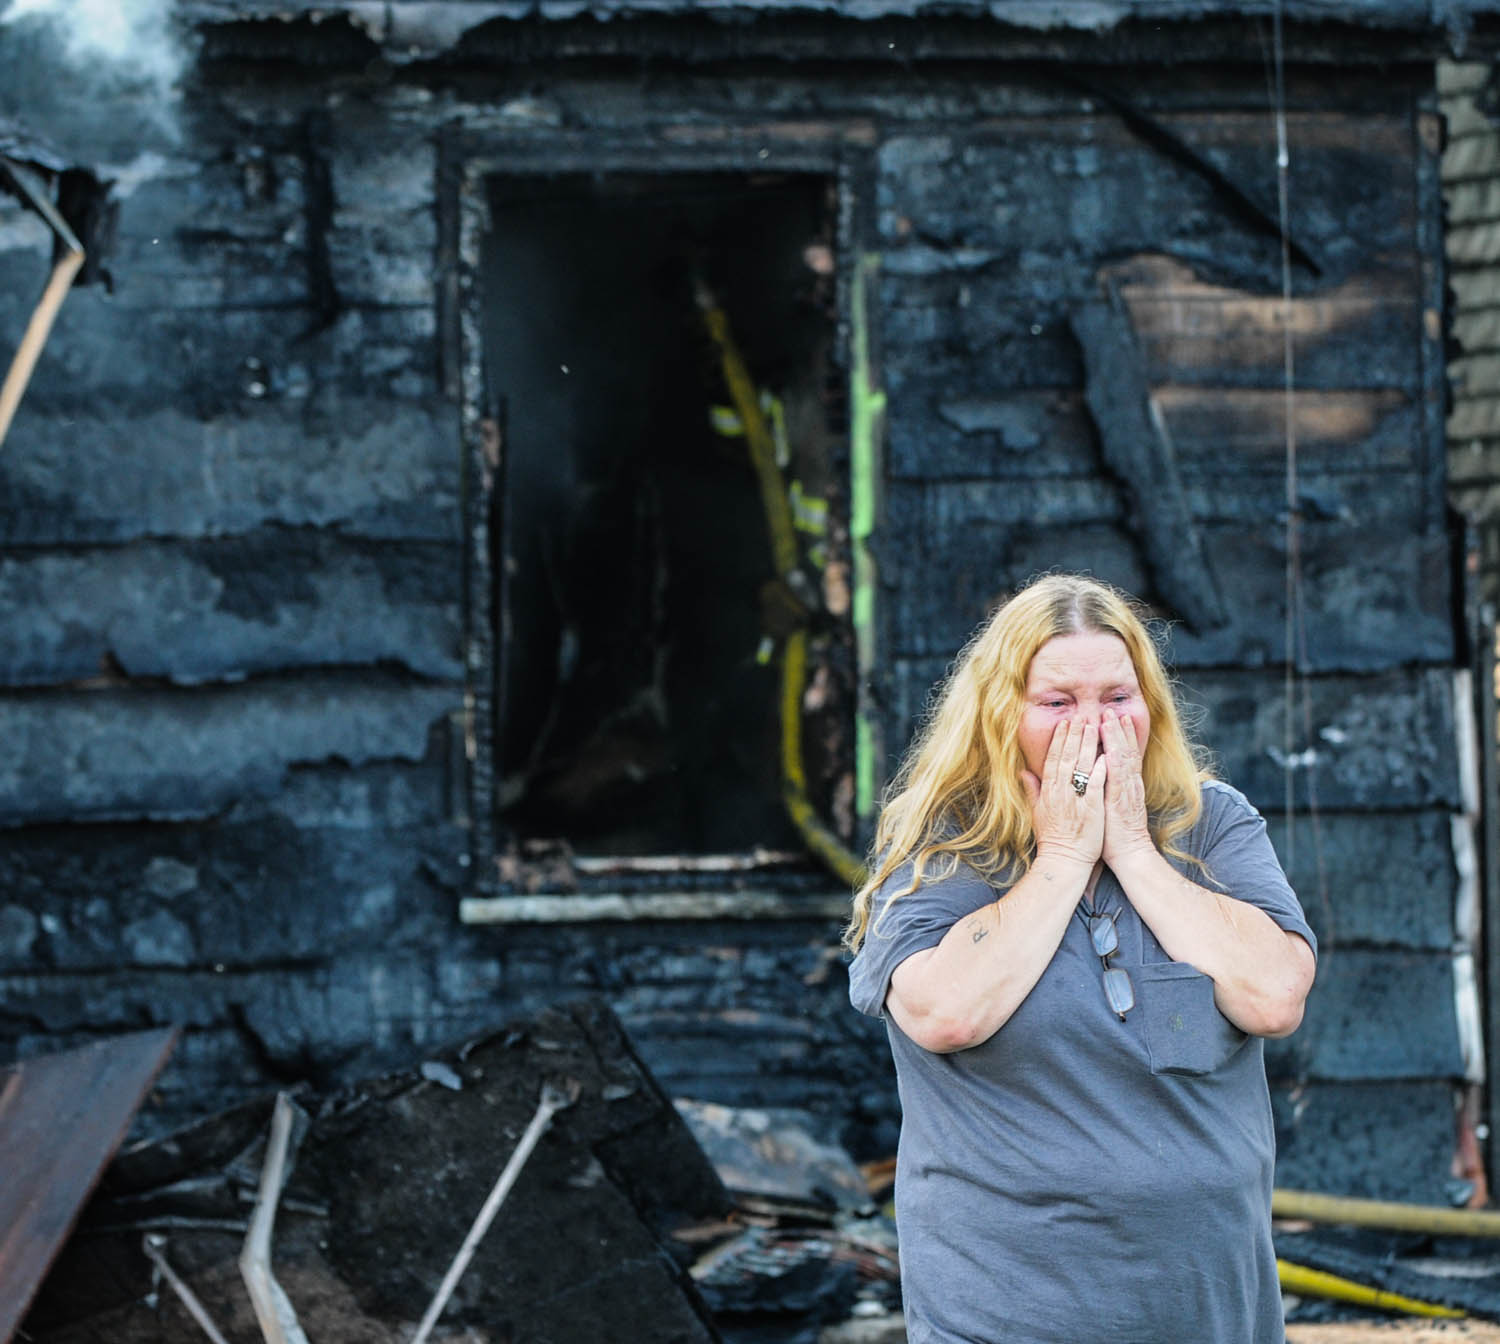 Barb Lucia, of East Moline, reacts to the early-morning fire which destroyed the house she was living in at 1339 17th St., East Moline. Ms. Lucia was not at home when the fire broke out about 6:30 this morning. The three people asleep inside the home escaped uninjured. (Todd Mizener - Dispatch/Argus)